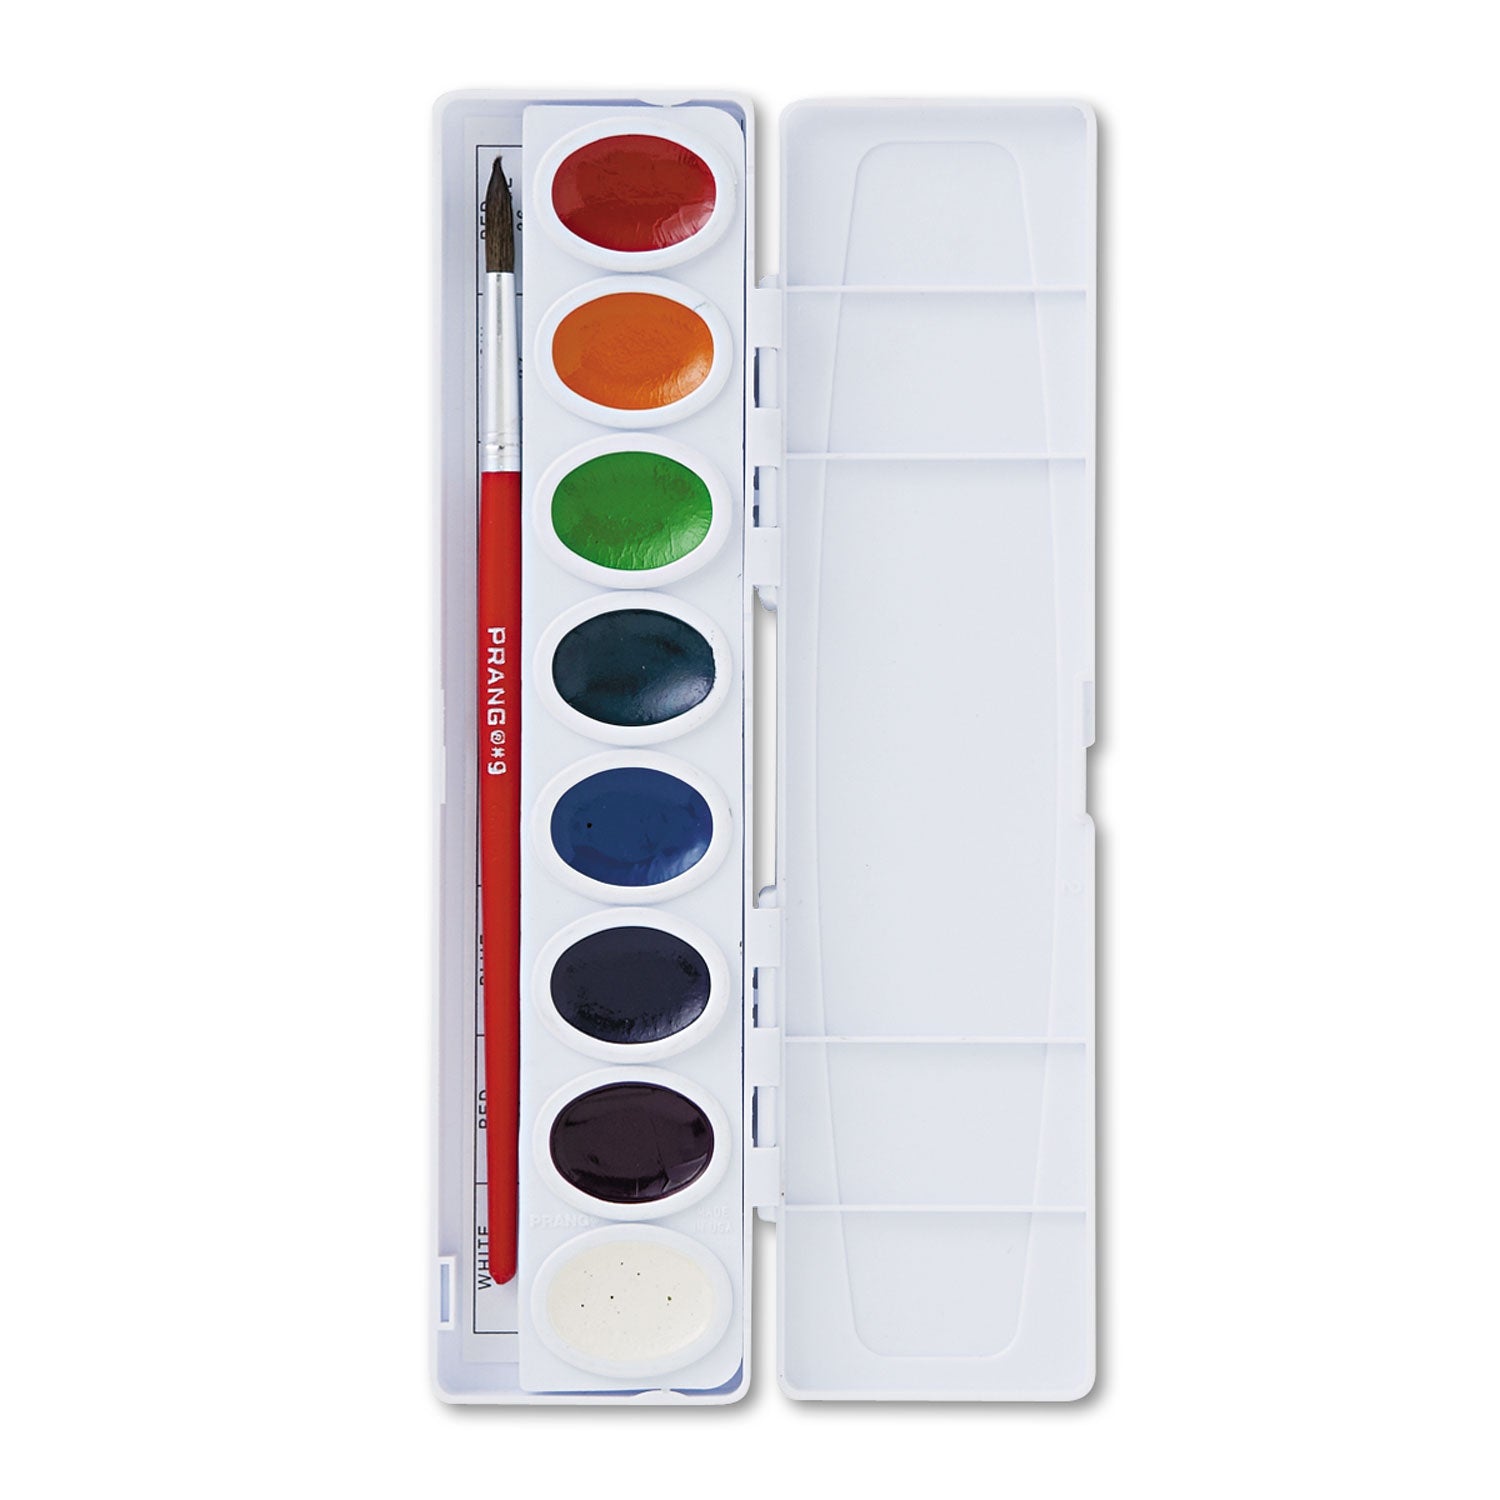 Professional Watercolors, 16 Assorted Colors, Oval Pan Palette Tray - 